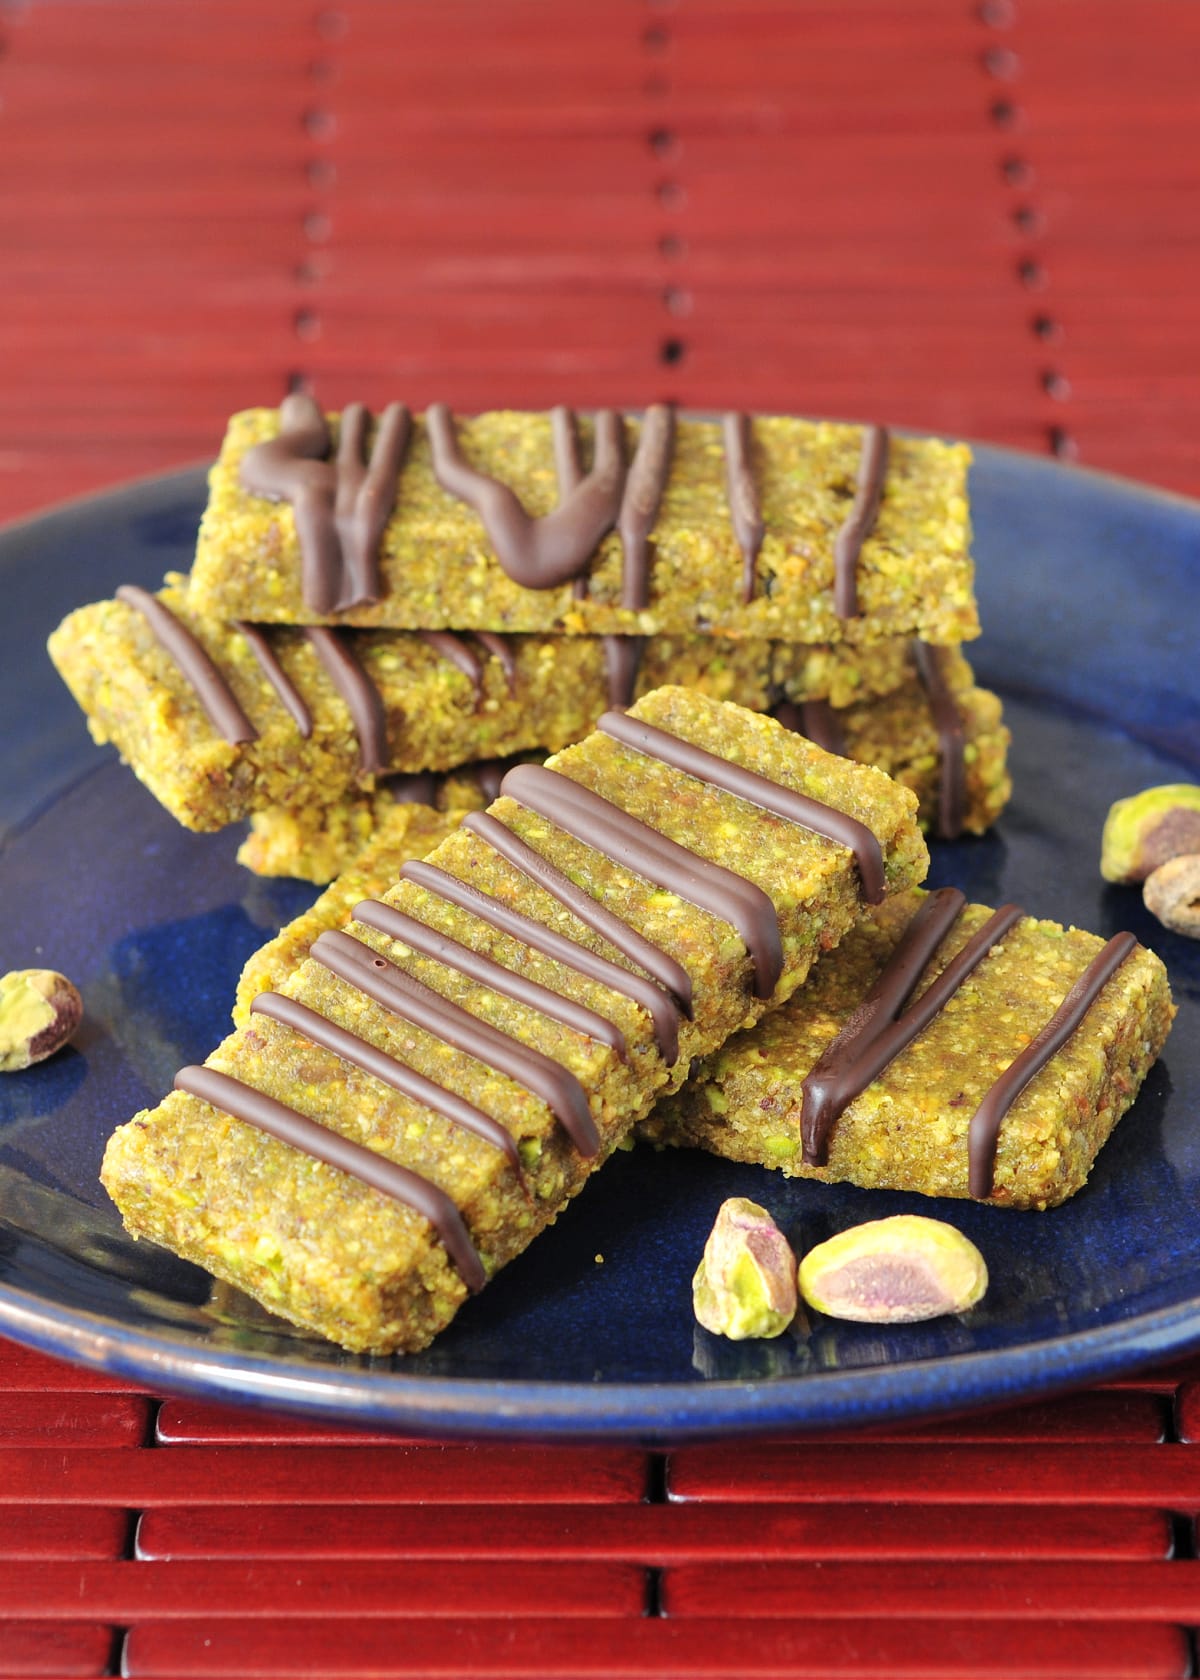 Light green pistachio bars drizzled with chocolate are stacked on a navy blue plate.